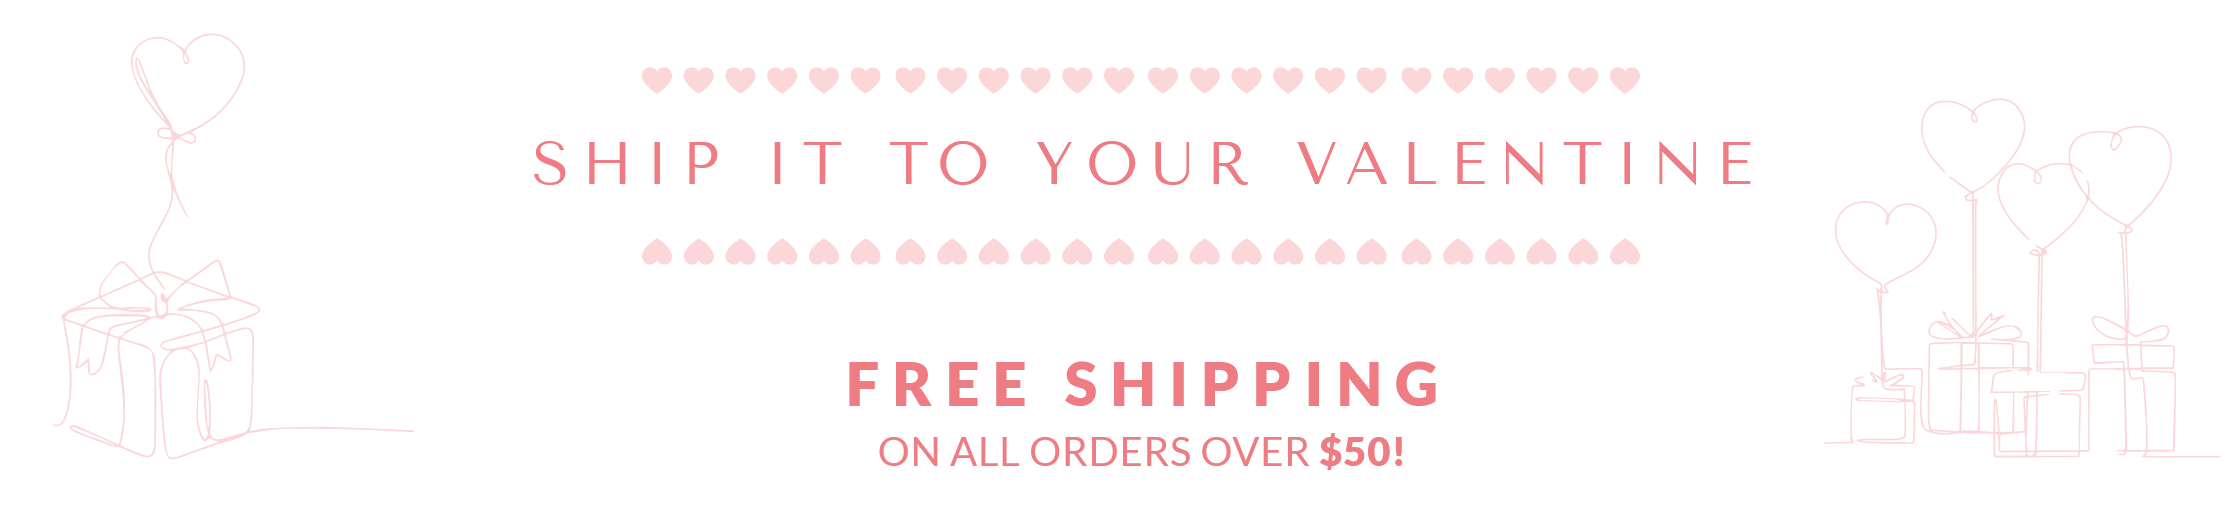 René Rofé Valentine's Day Sale - Get 25% Off Sitewide and free shipping on all orders over $50